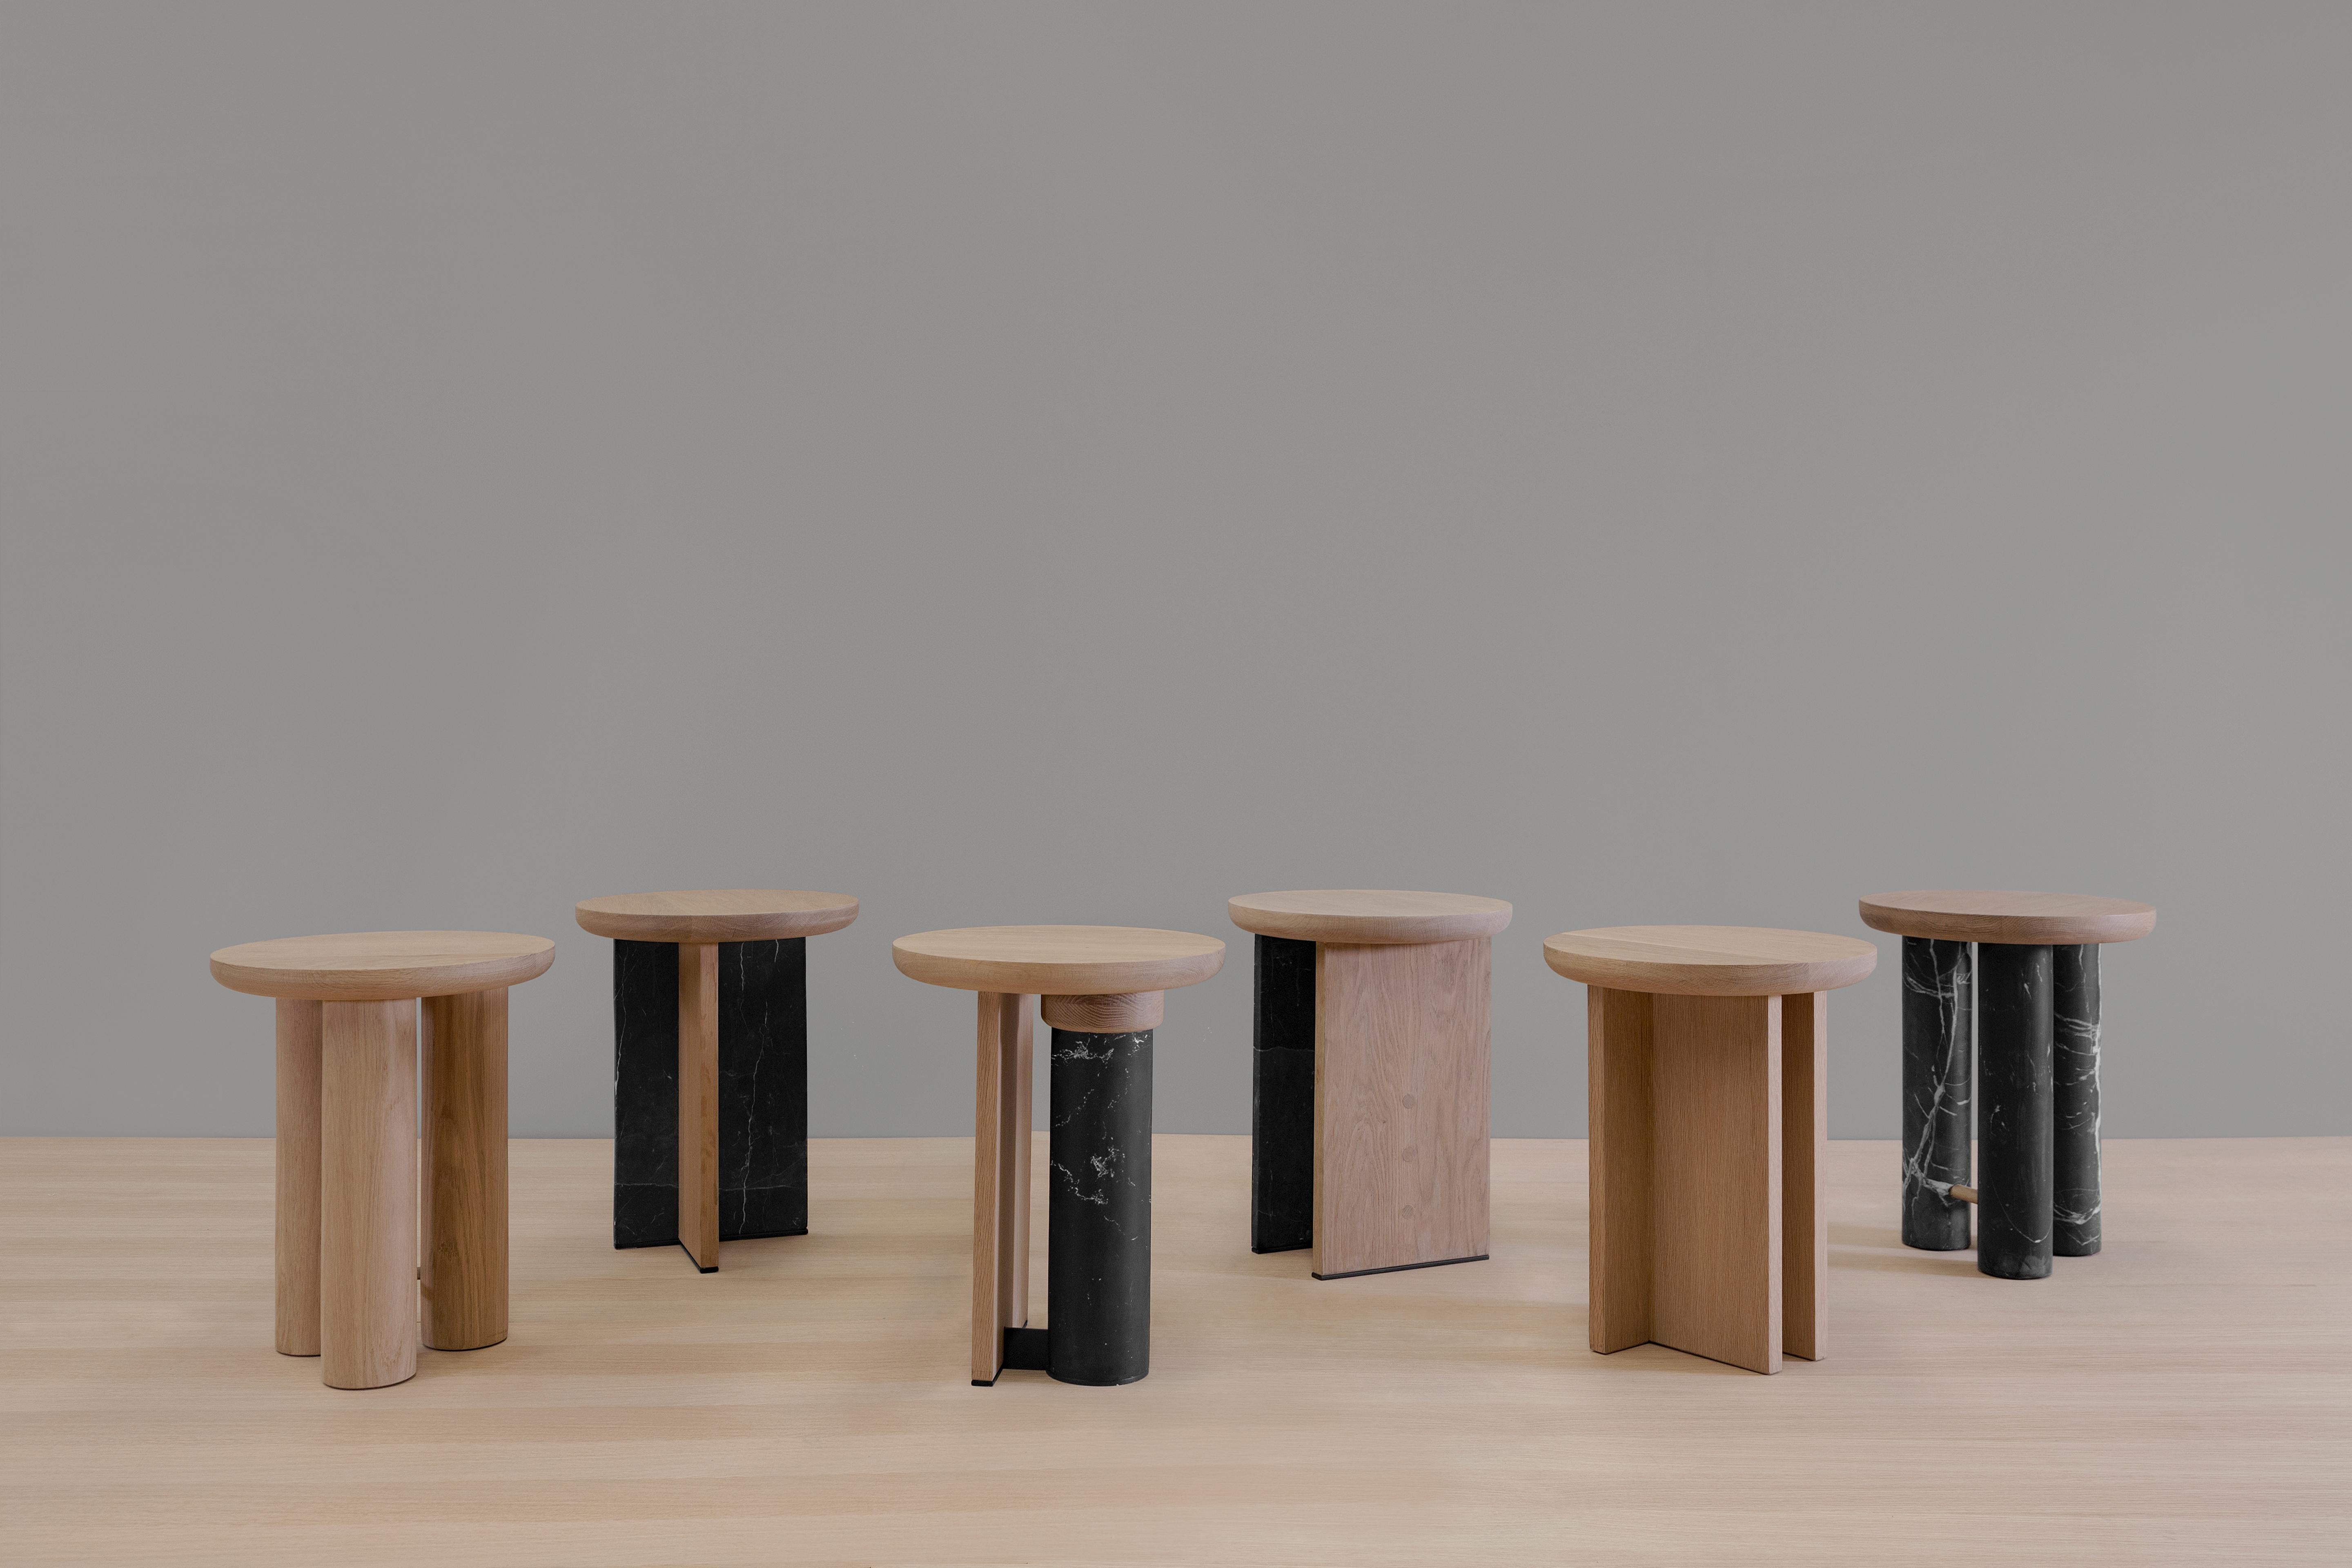 Mexican Antropología 03, Sculptural Stool, End Table, Side Table Made of Solid Oak Wood